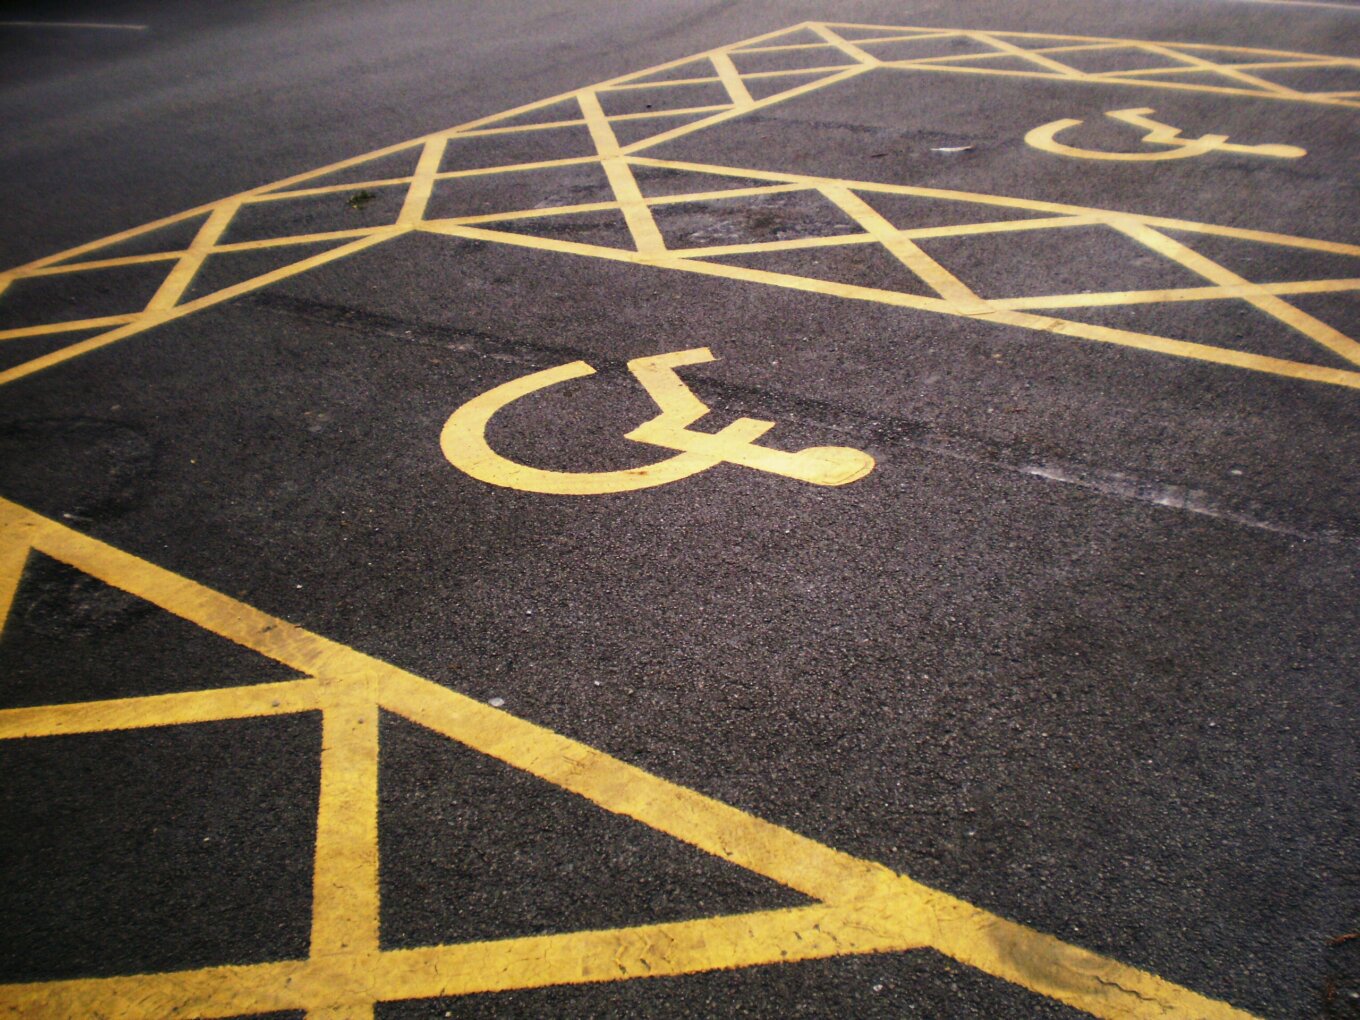 An accessible parking space